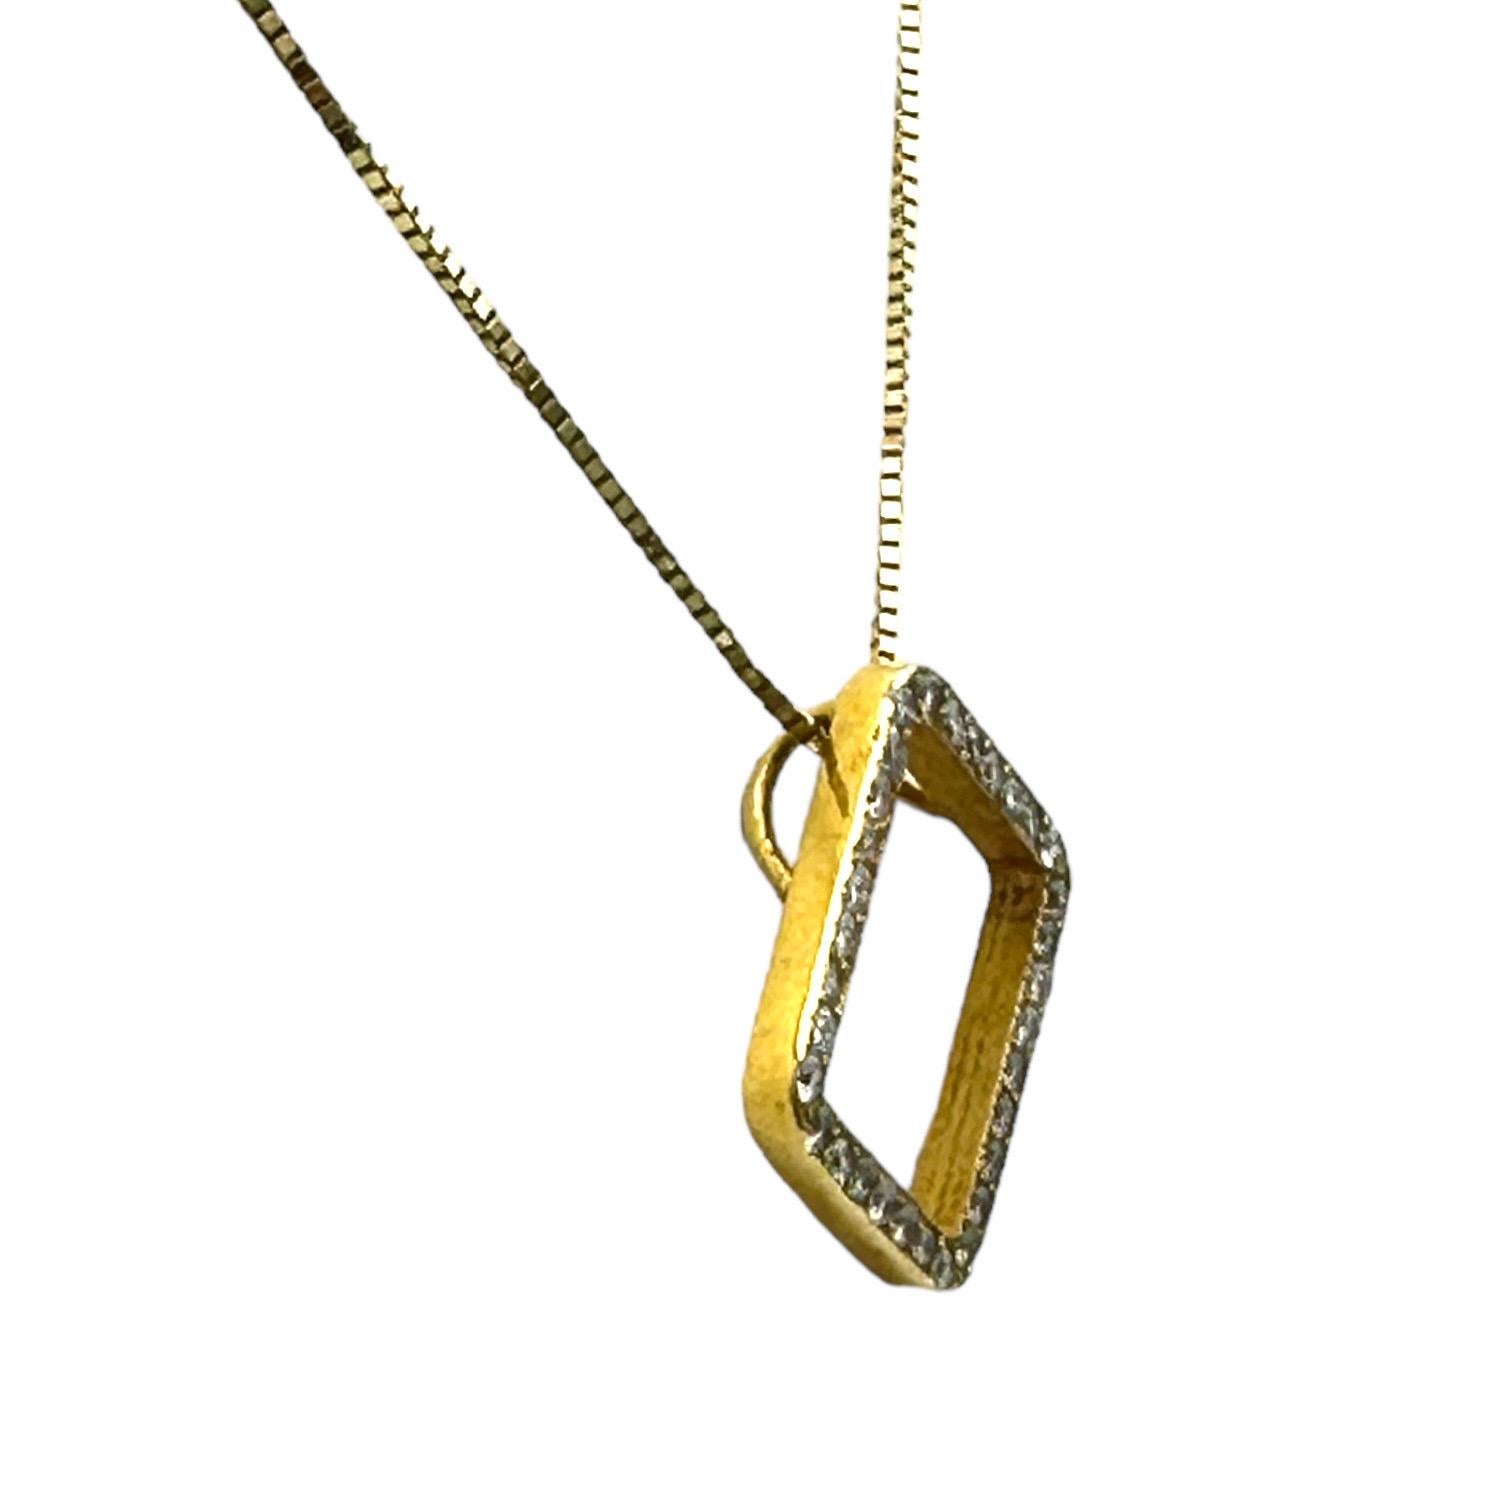 Make a statement with this elegant 14K Yellow Gold Halo Modern Sparkling Pendant and chain. The beautiful diamond halo pendant adds a layer of luster and sparkle to any look. This classic piece is the perfect way to celebrate a special occasion or